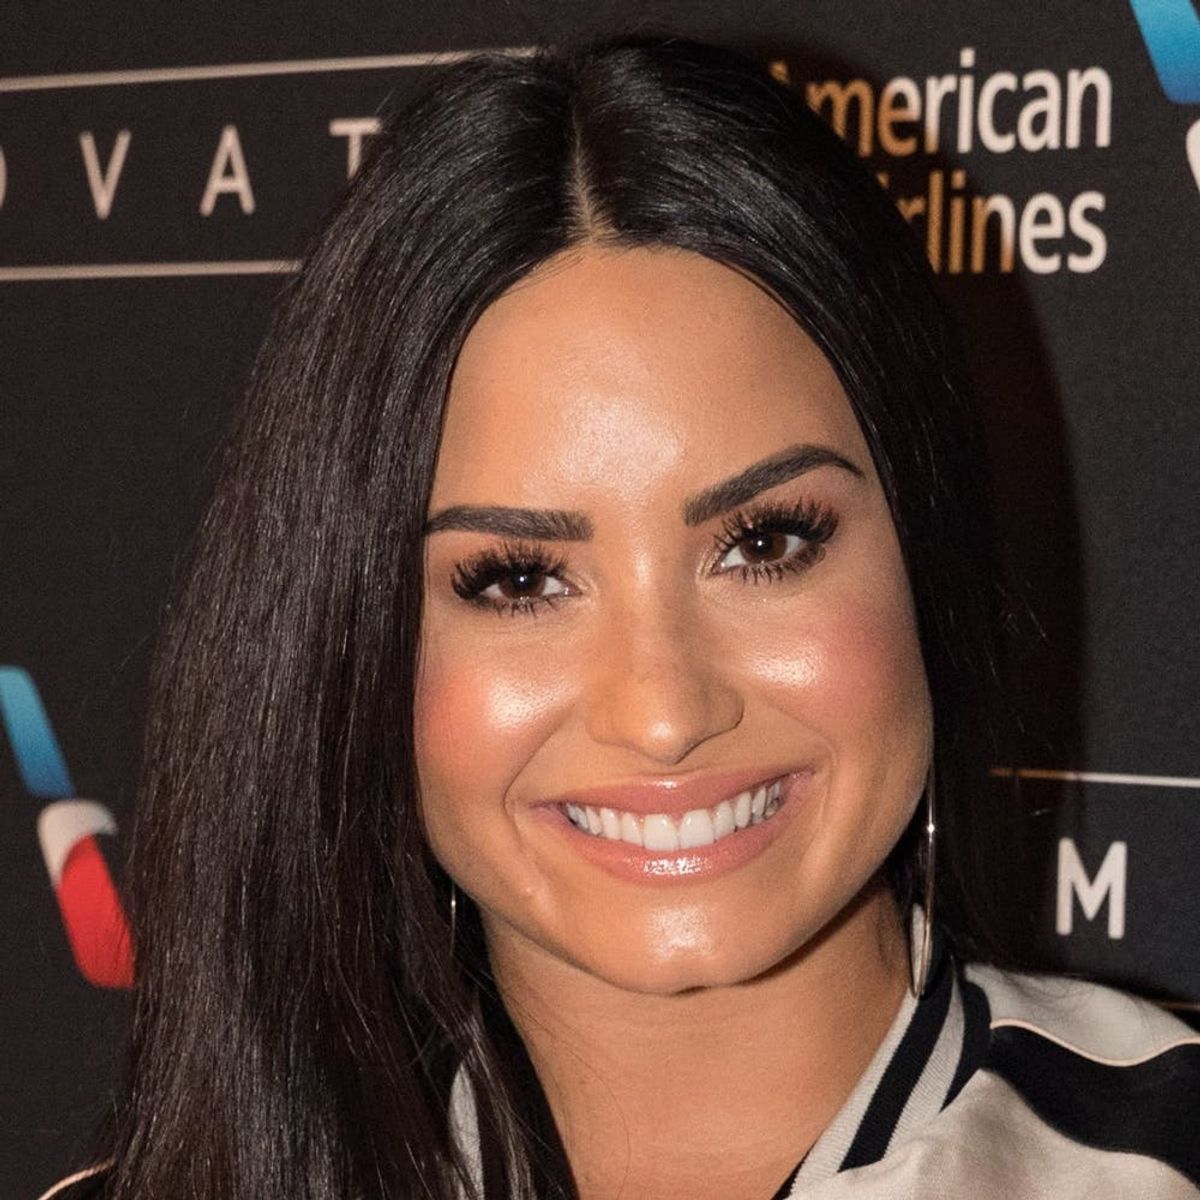 Demi Lovato Helped Surprise This ‘American Idol’ Alum With a Proposal That Will Make You Weep